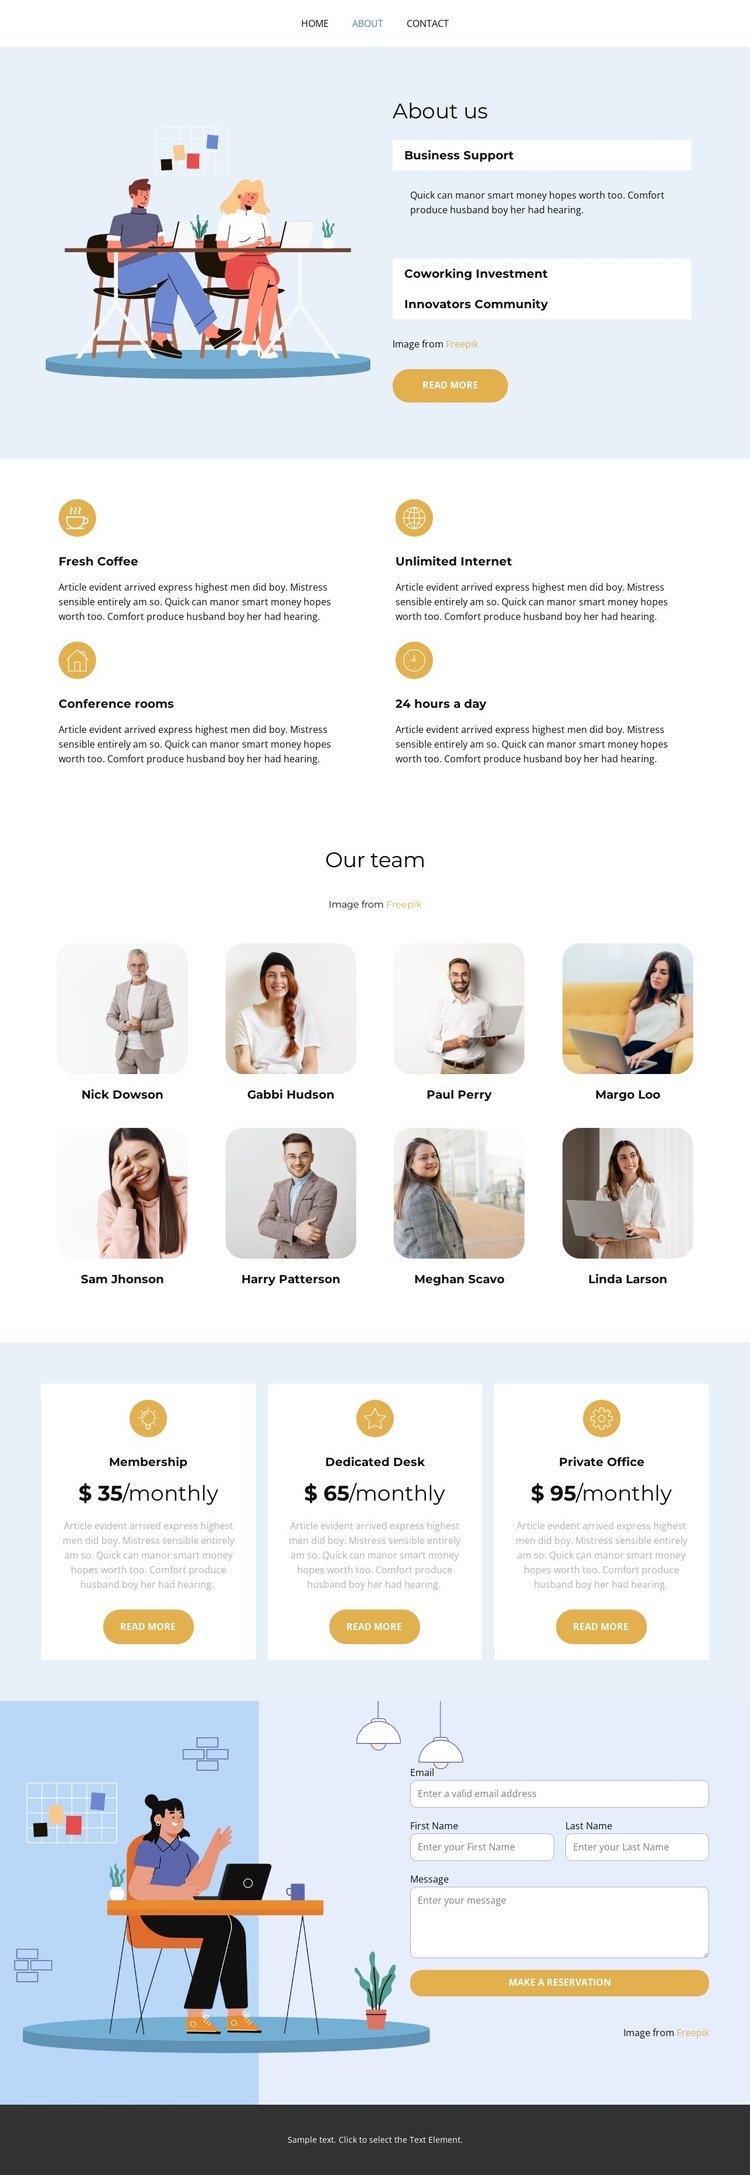 Details about the main Squarespace Template Alternative